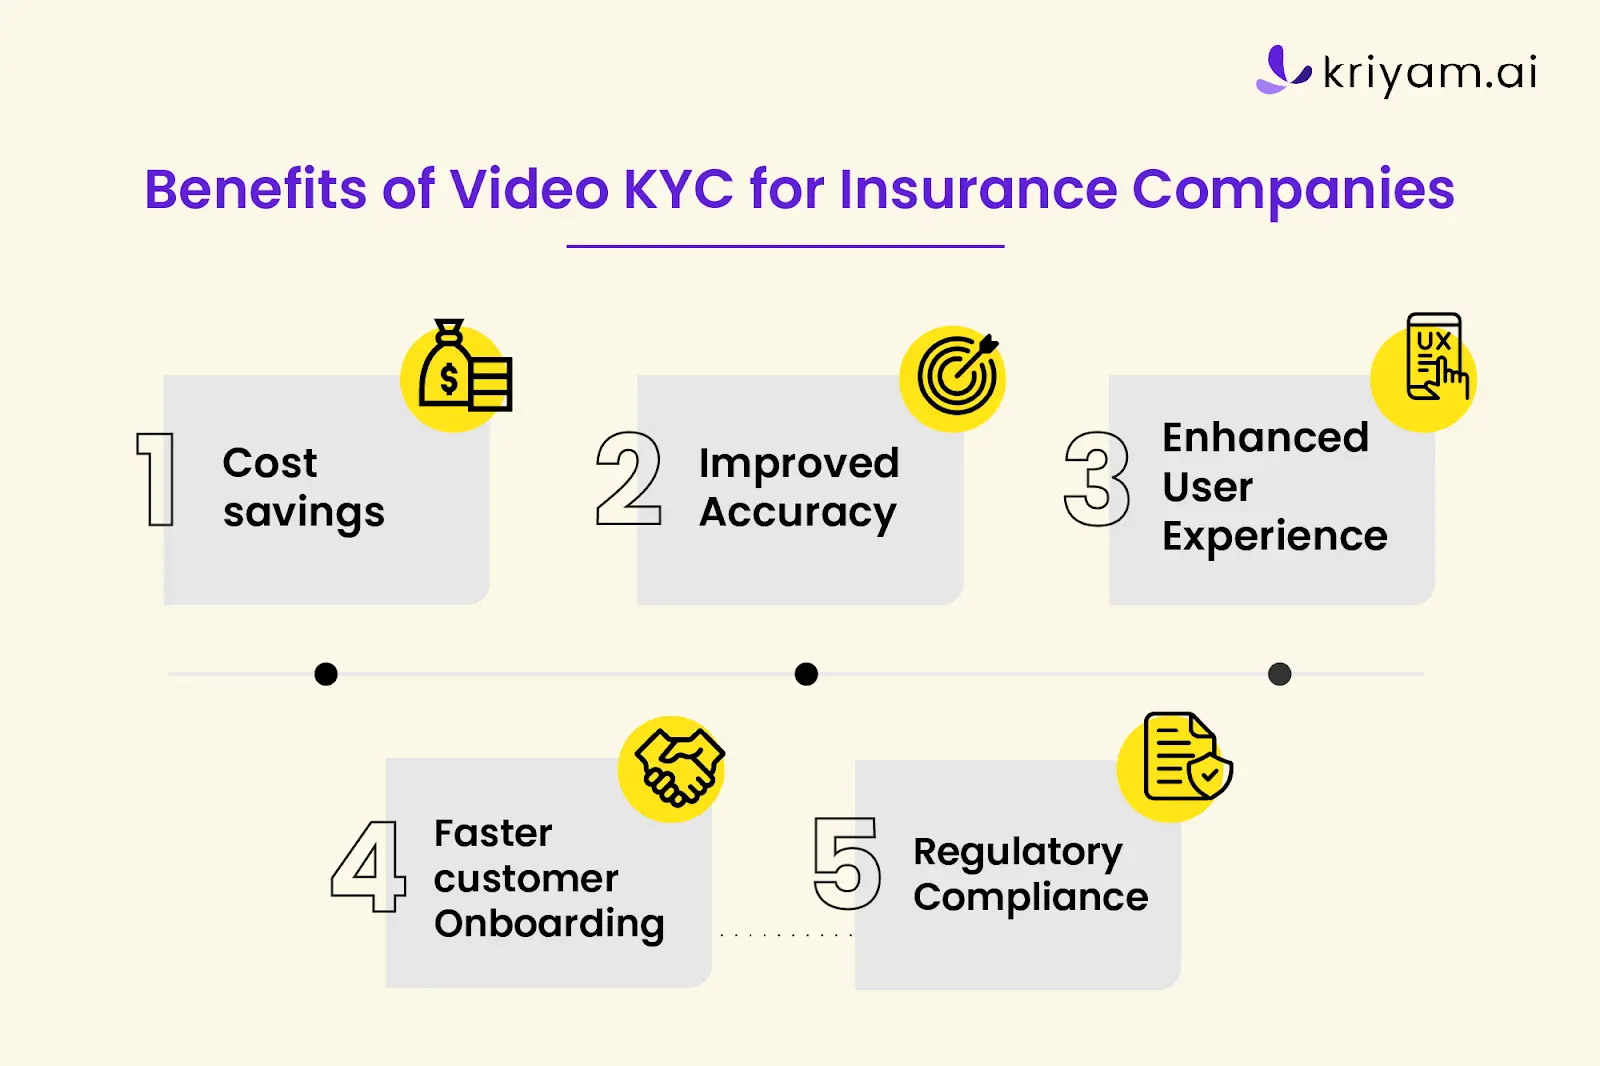 Benefits of Video KYC for Insurance Companies